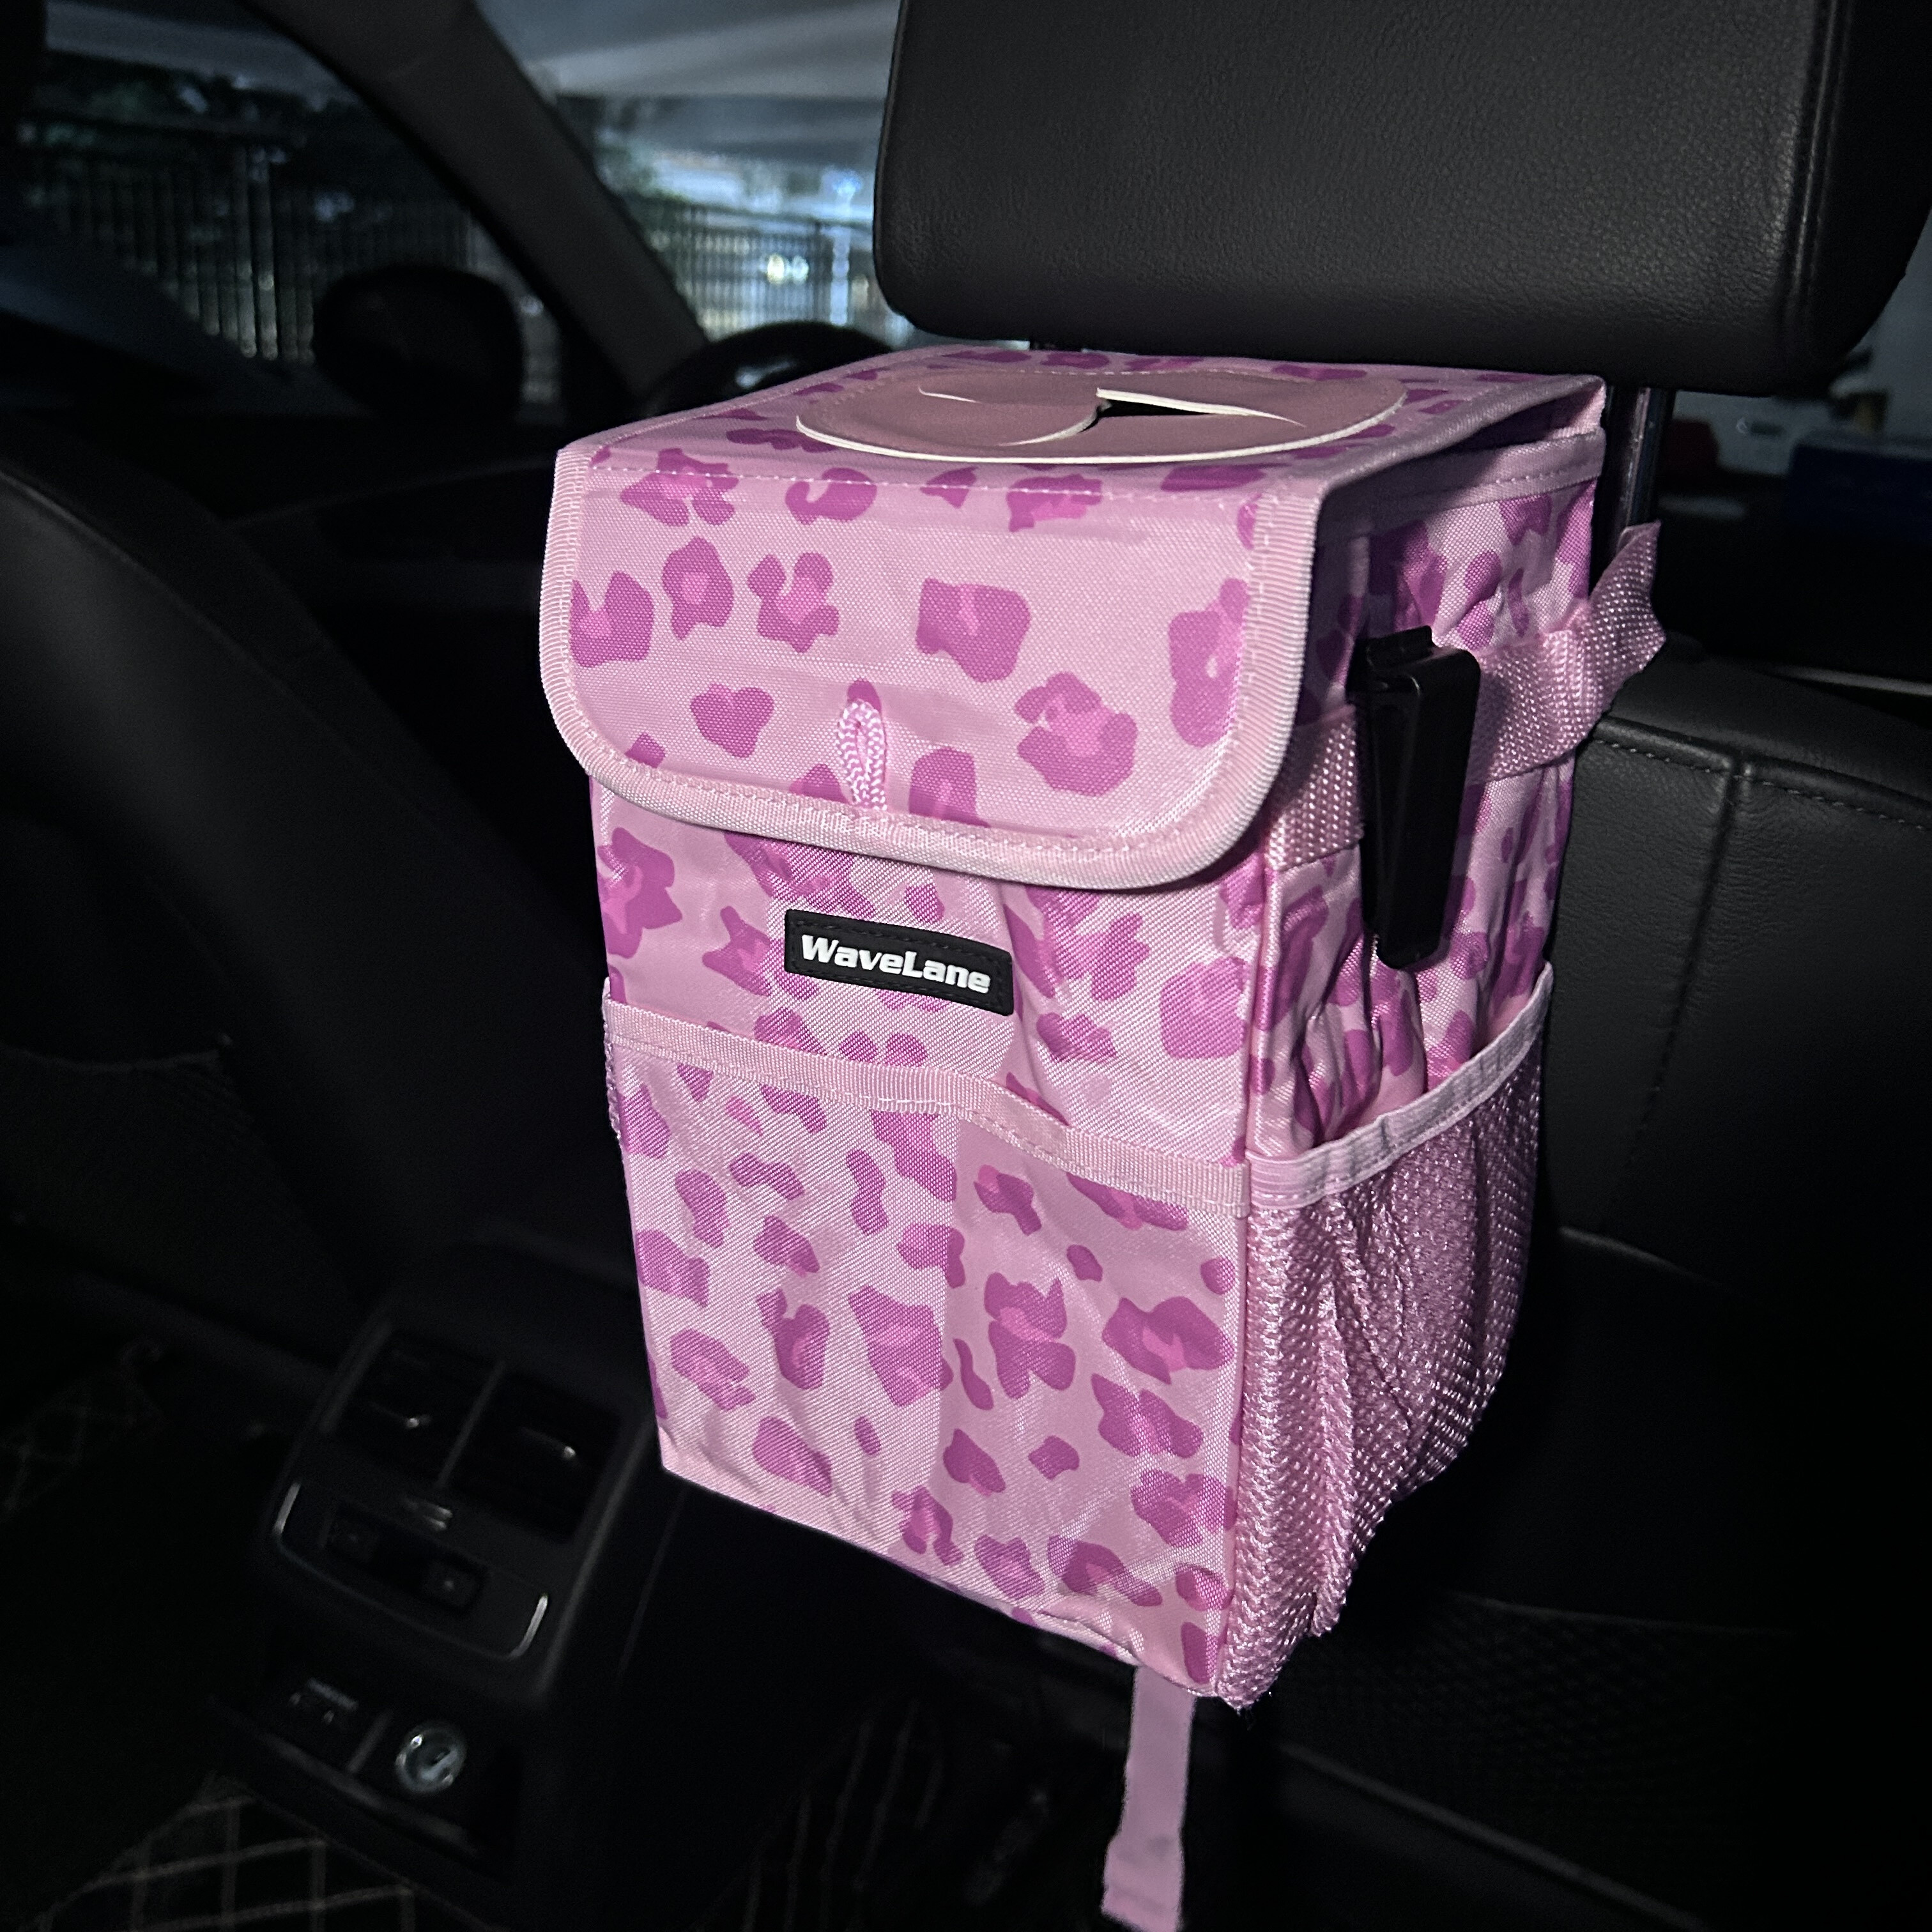 EPAuto Waterproof Car Trash Can with Lid and Storage Pockets, Pink